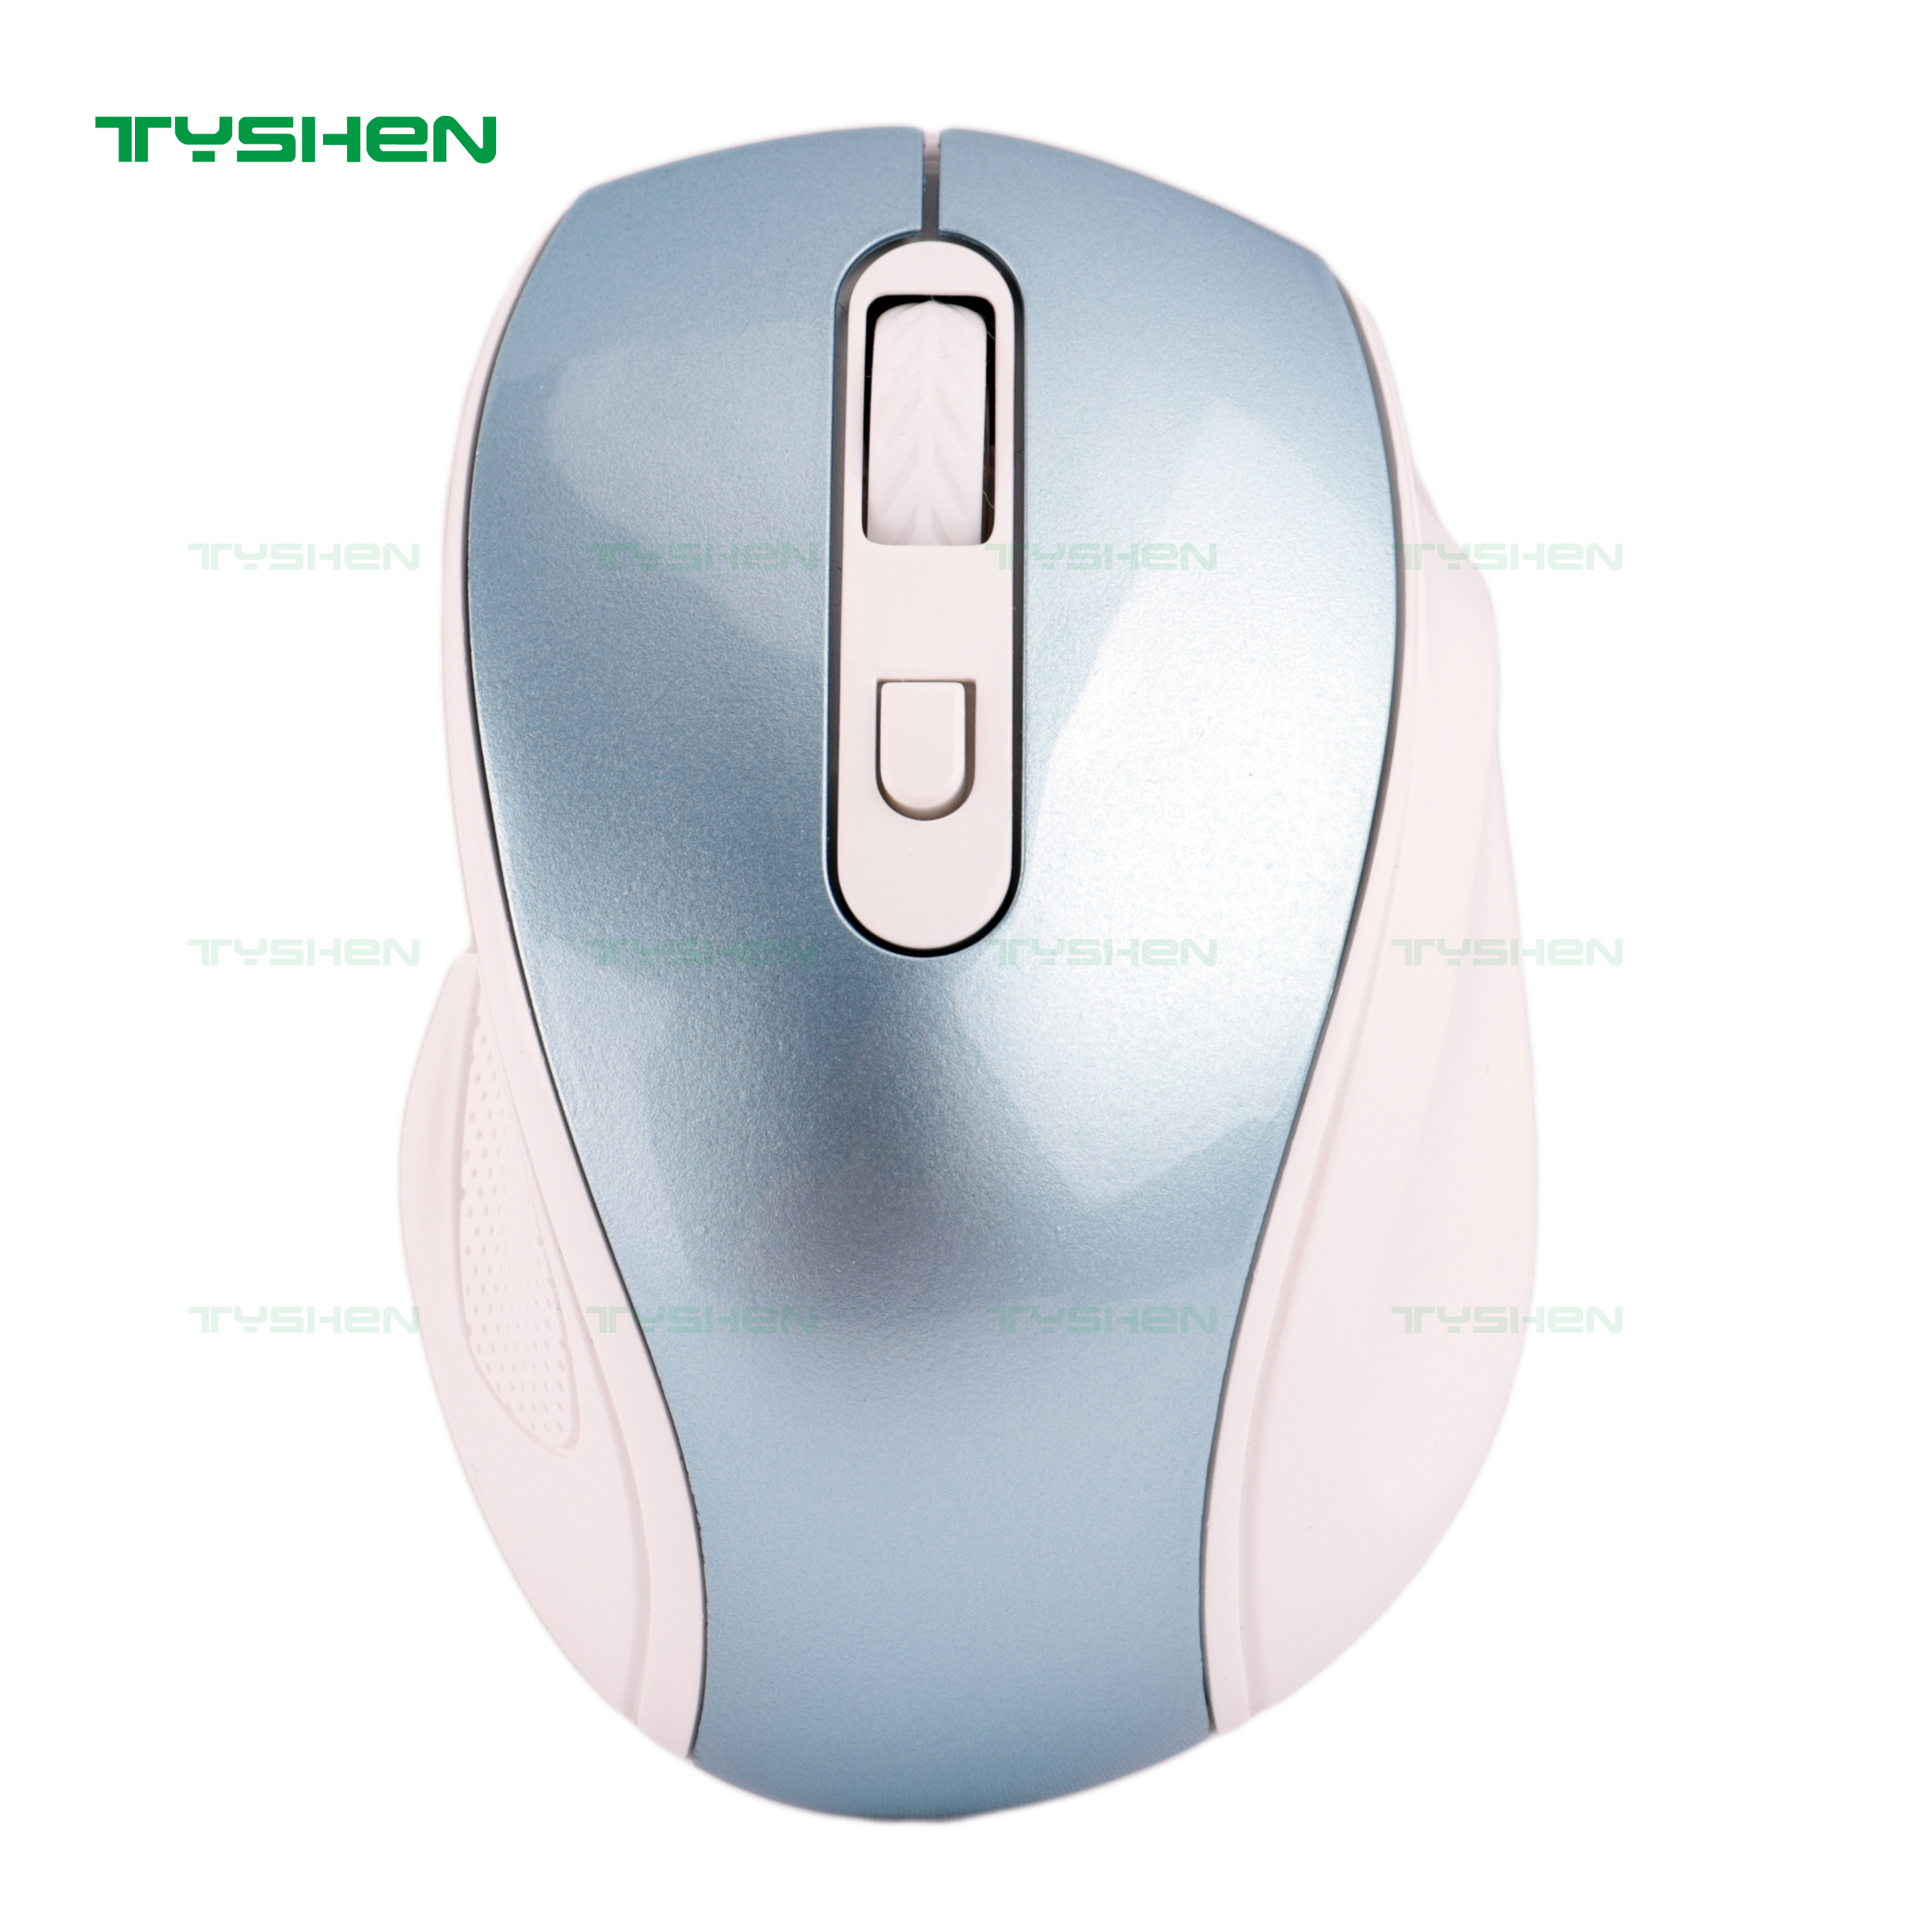 Wireless Mouse,6 Buttons,800/1200/1600 DPI,With Forward&Backward Key,Various Color Available,In Stock,Low MOQ